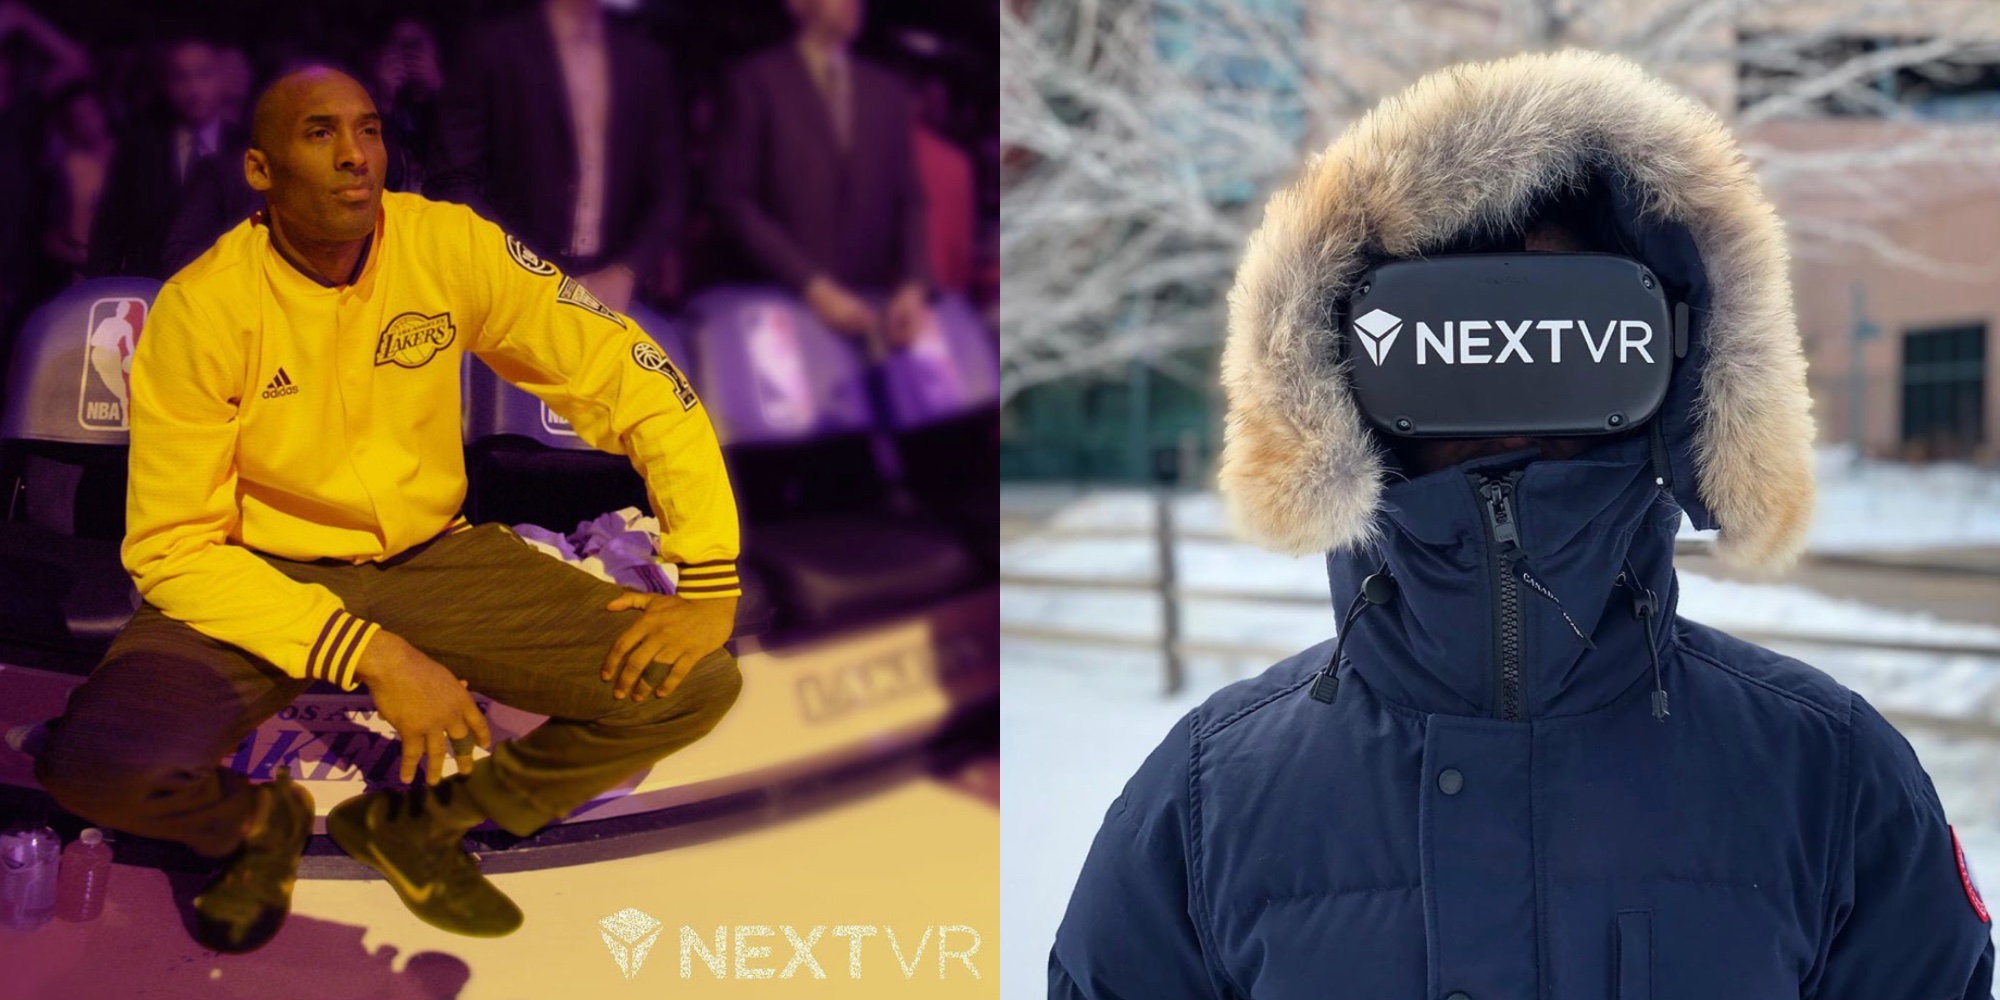 photo of Exclusive: Apple likely buyer of NextVR, a live event streaming AR/VR company being sold for ~$100M image